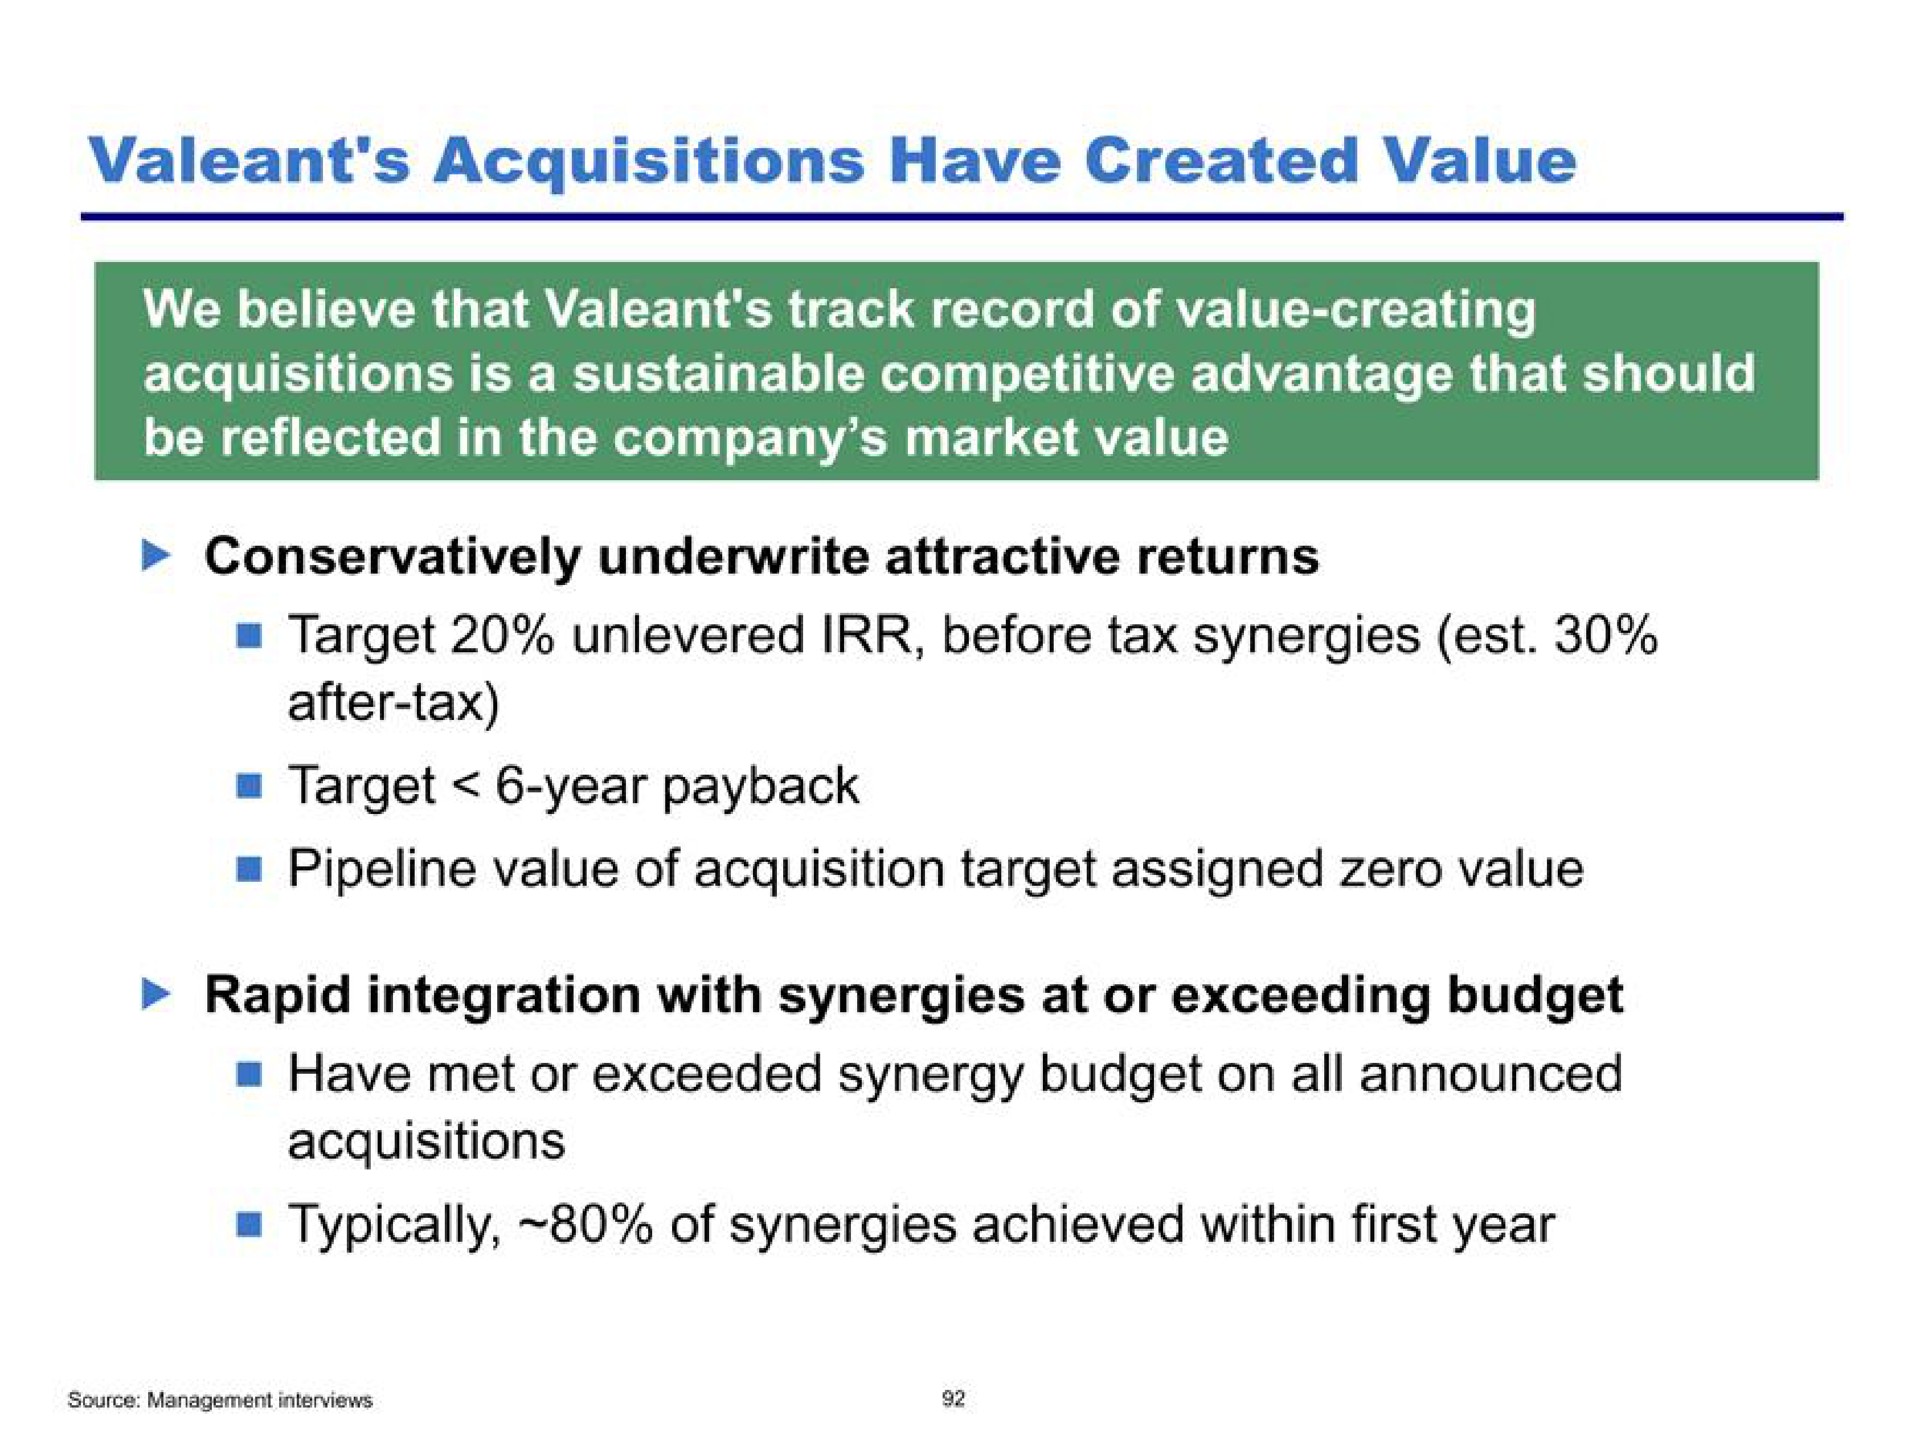 acquisitions have created value | Pershing Square